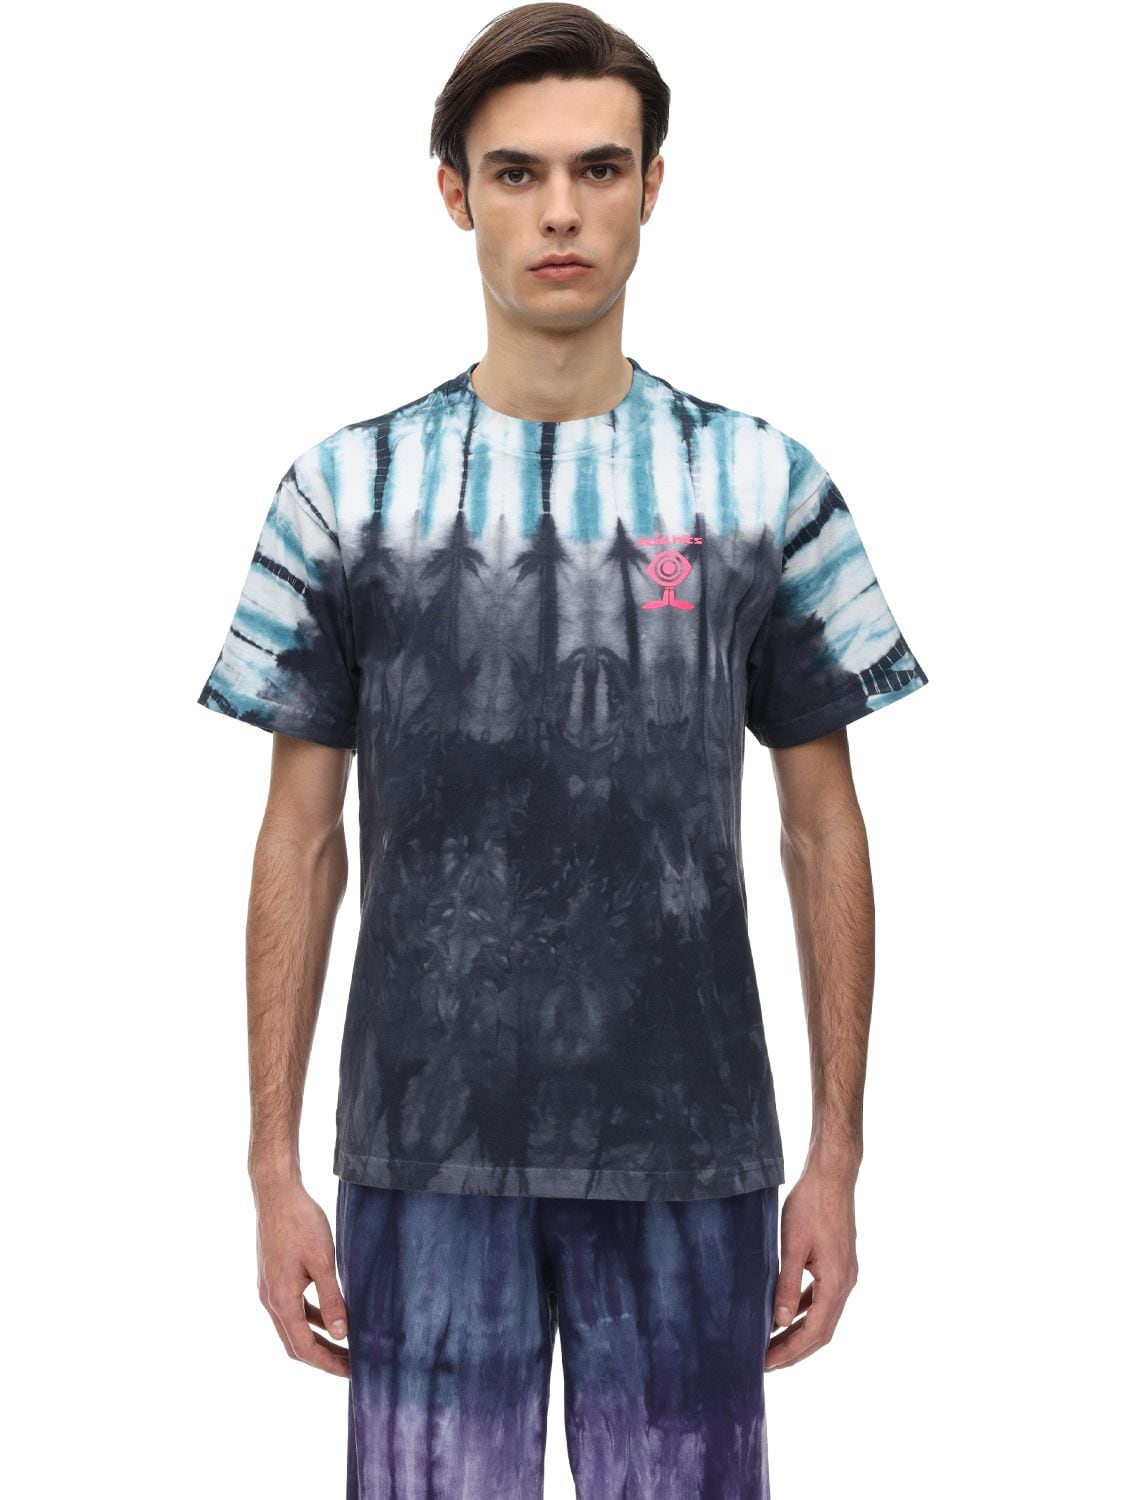 Insomniac Acid Hits Cotton Jersey T-shirt In Blue